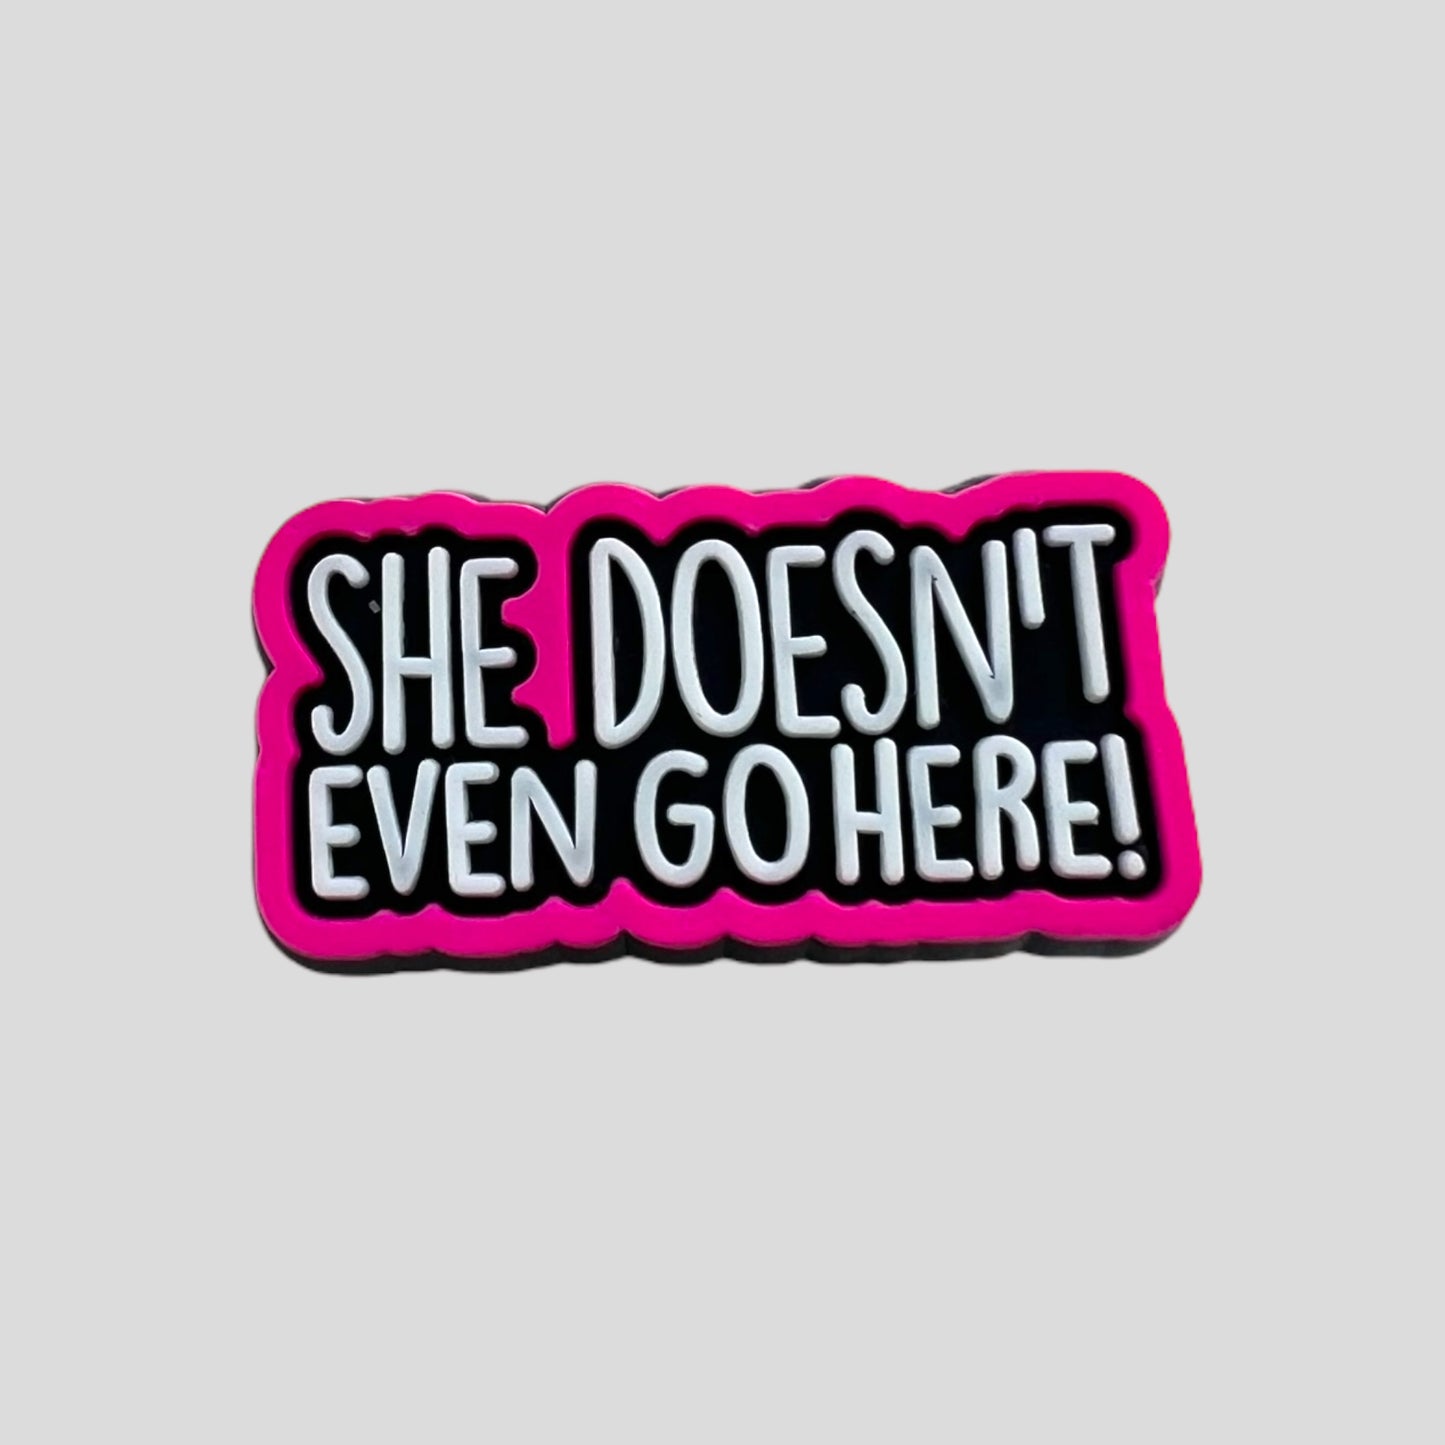 She doesn’t even go here | Quotes